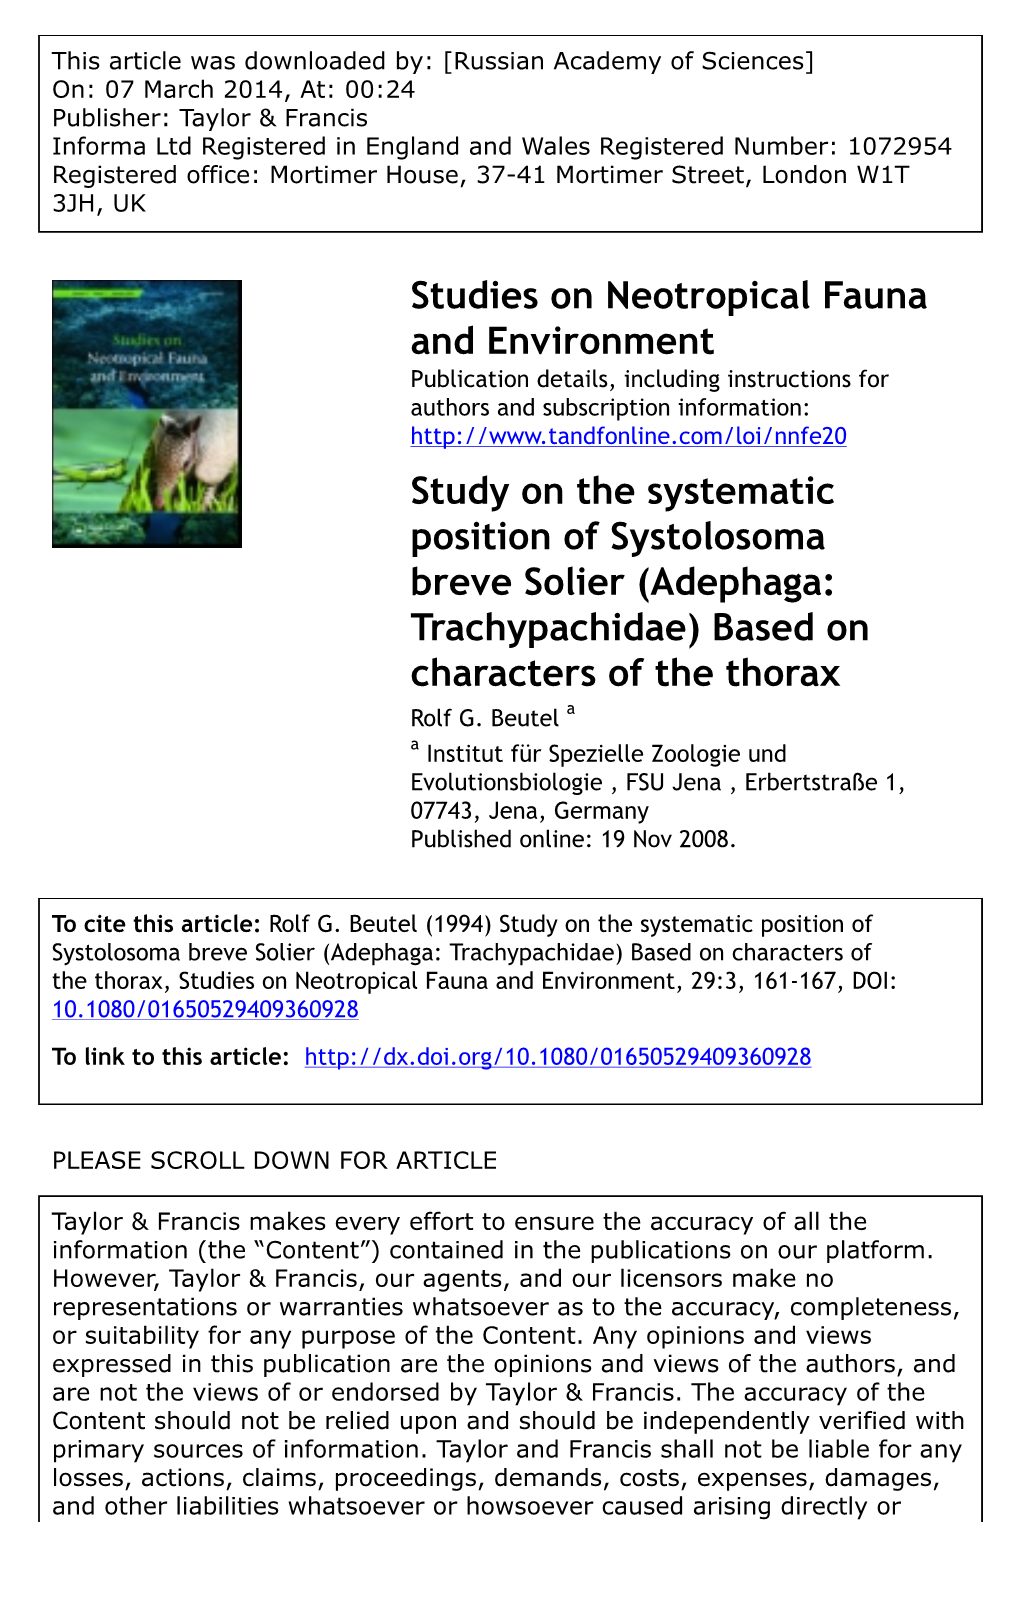 Studies on Neotropical Fauna and Environment Study on The